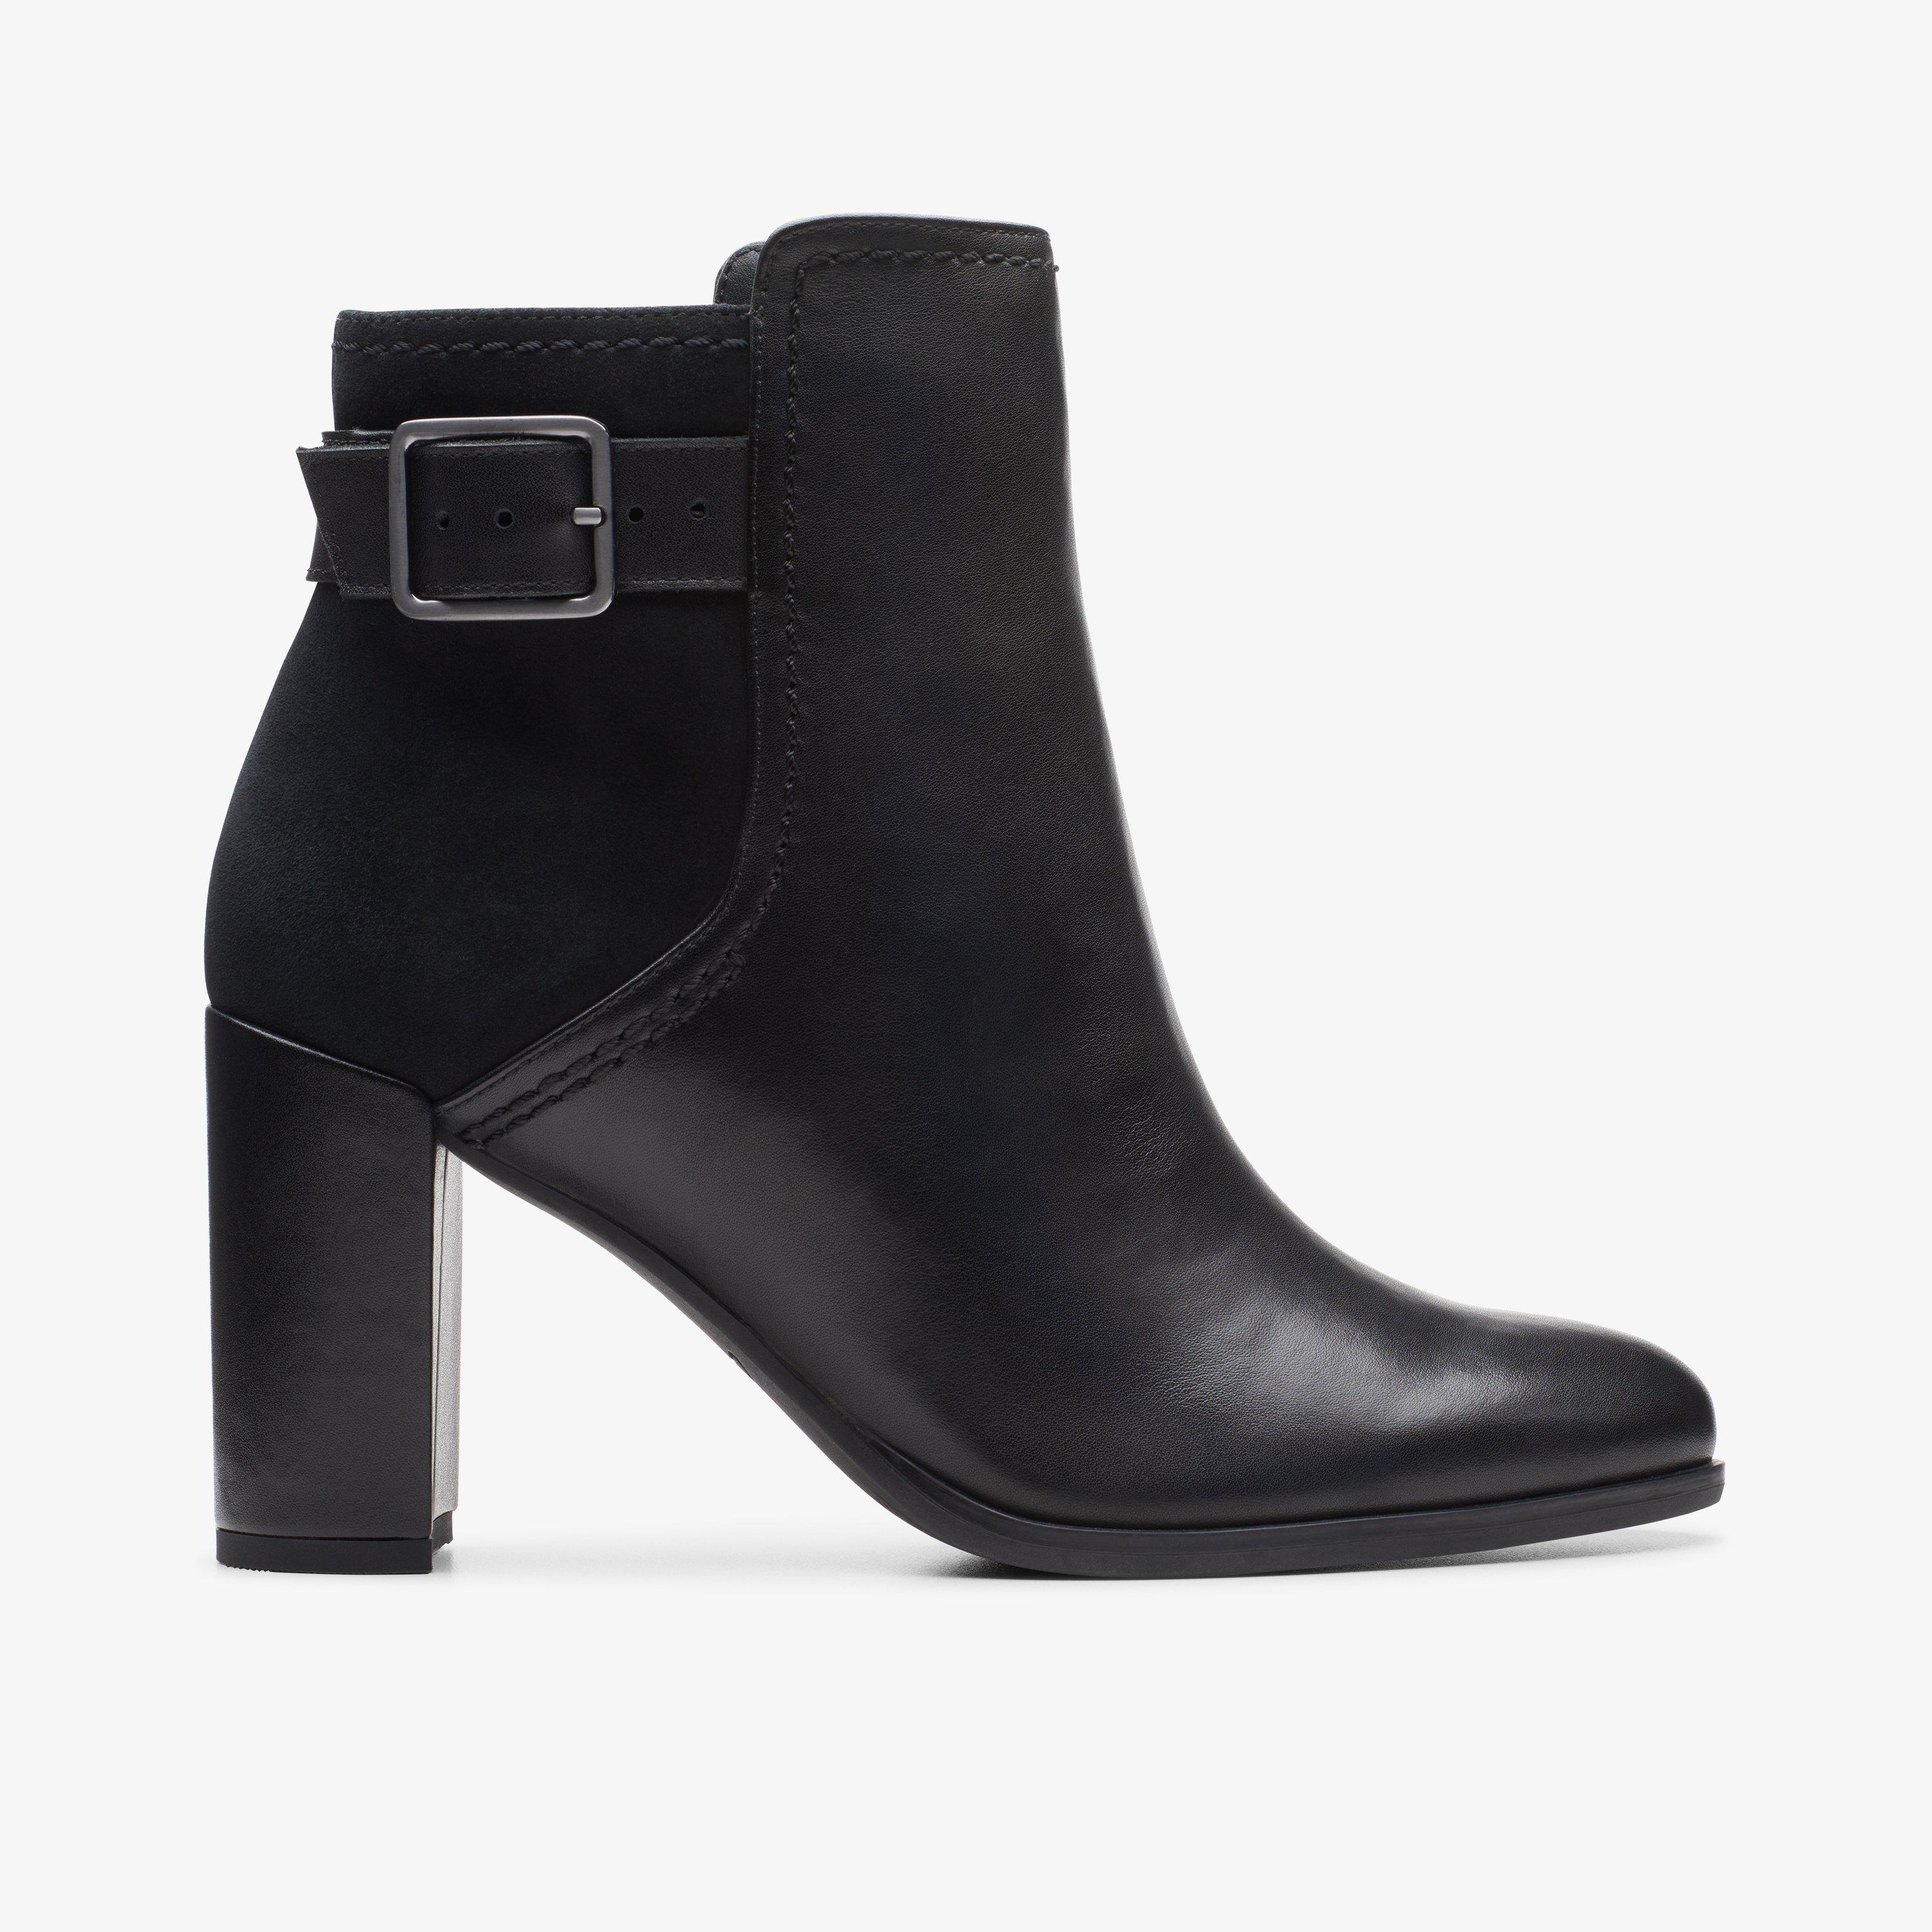 WOMENS Freva 85 Buckle Black Leather Ankle Boots | Clarks US